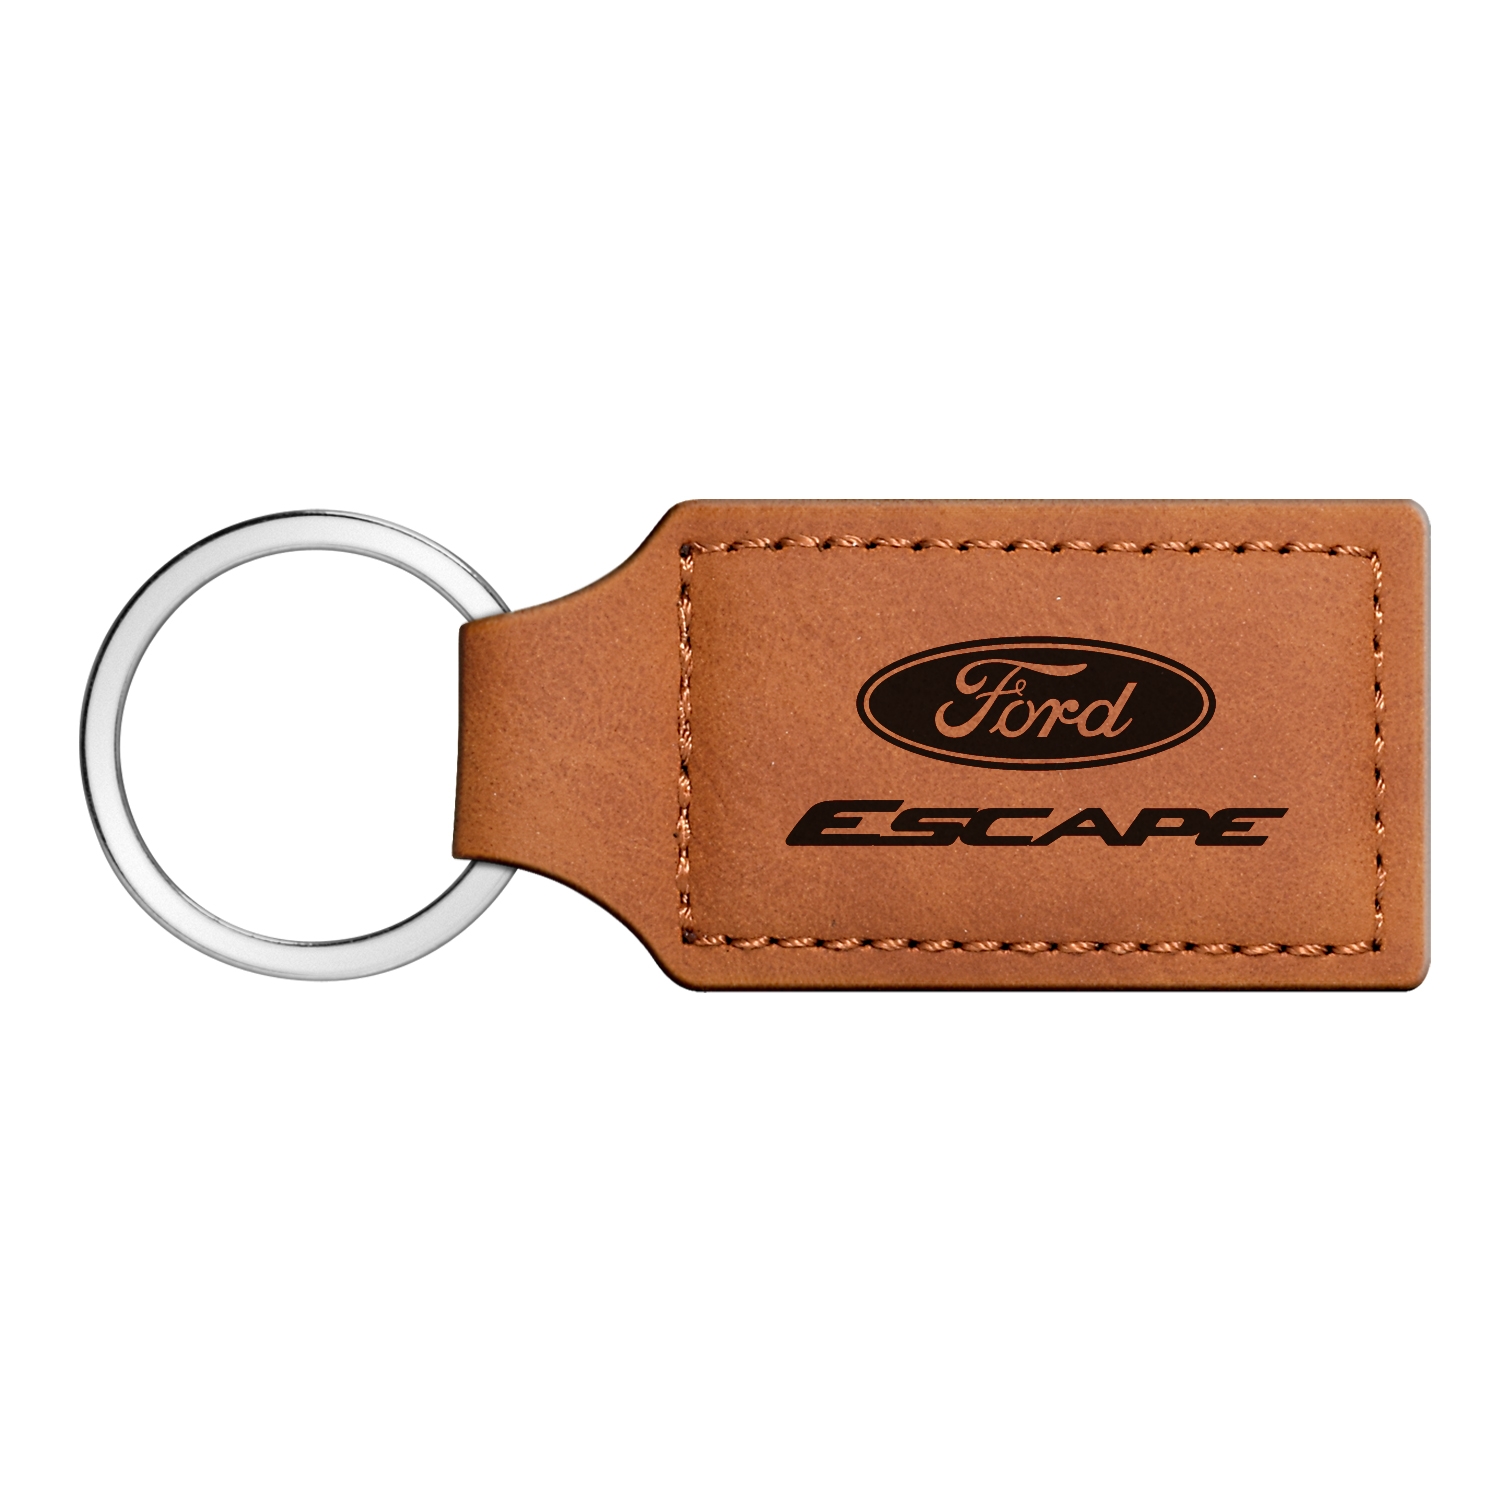 Ford Escape Rectangular Brown Leather Key Chain